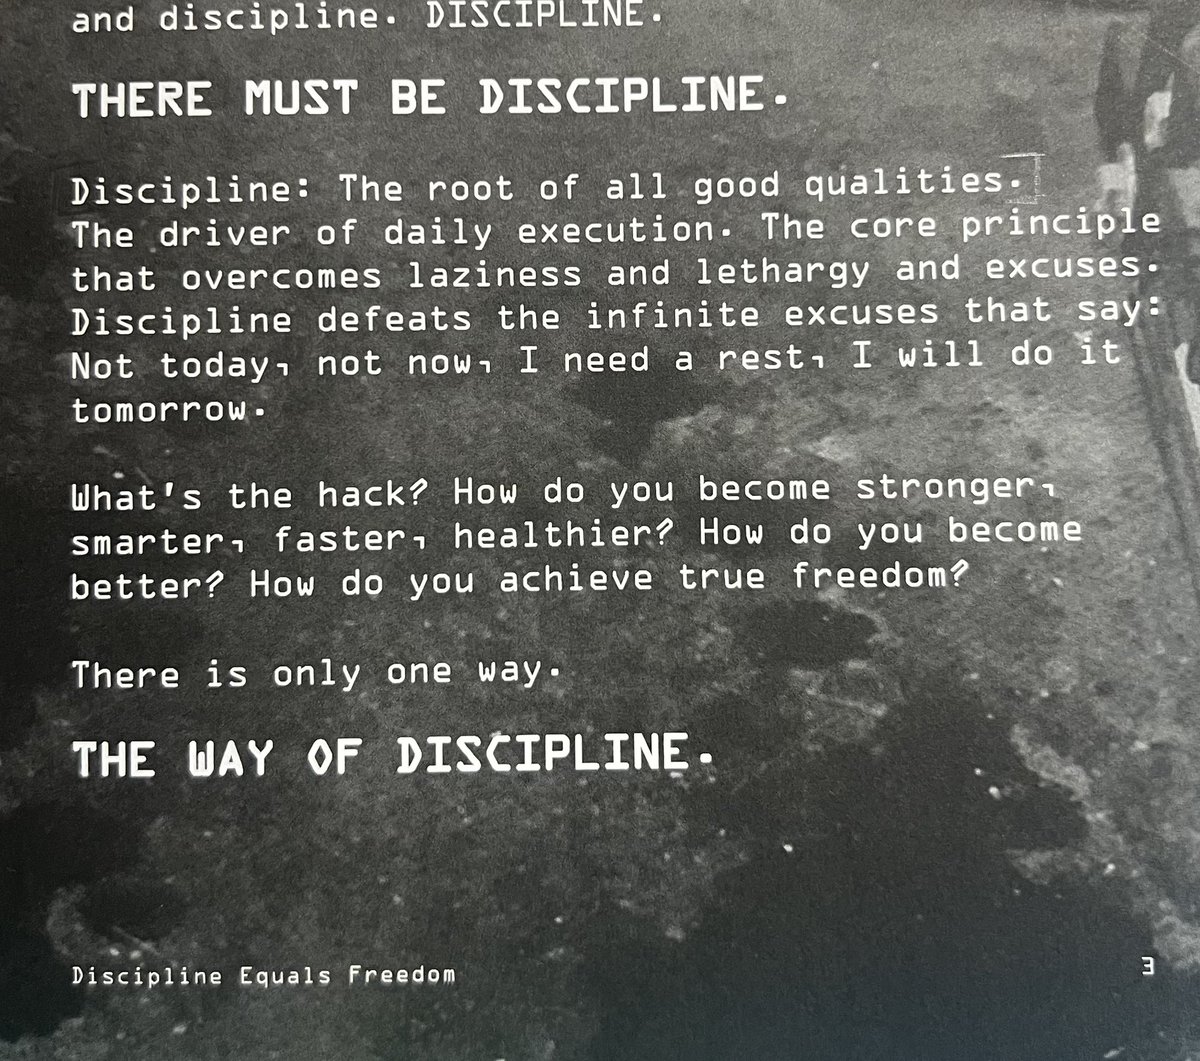 #books #reading #readingtime #discipline #equals #freedom #disciplineequalsfreedom #jockowillink #library #knowledge #wisdom #root #good #qualities #daily #execution #laziness #lethargy #excuses #defeats #infinite #today #tomorrow #rest #hack #stronger #smarter #faster #healthier